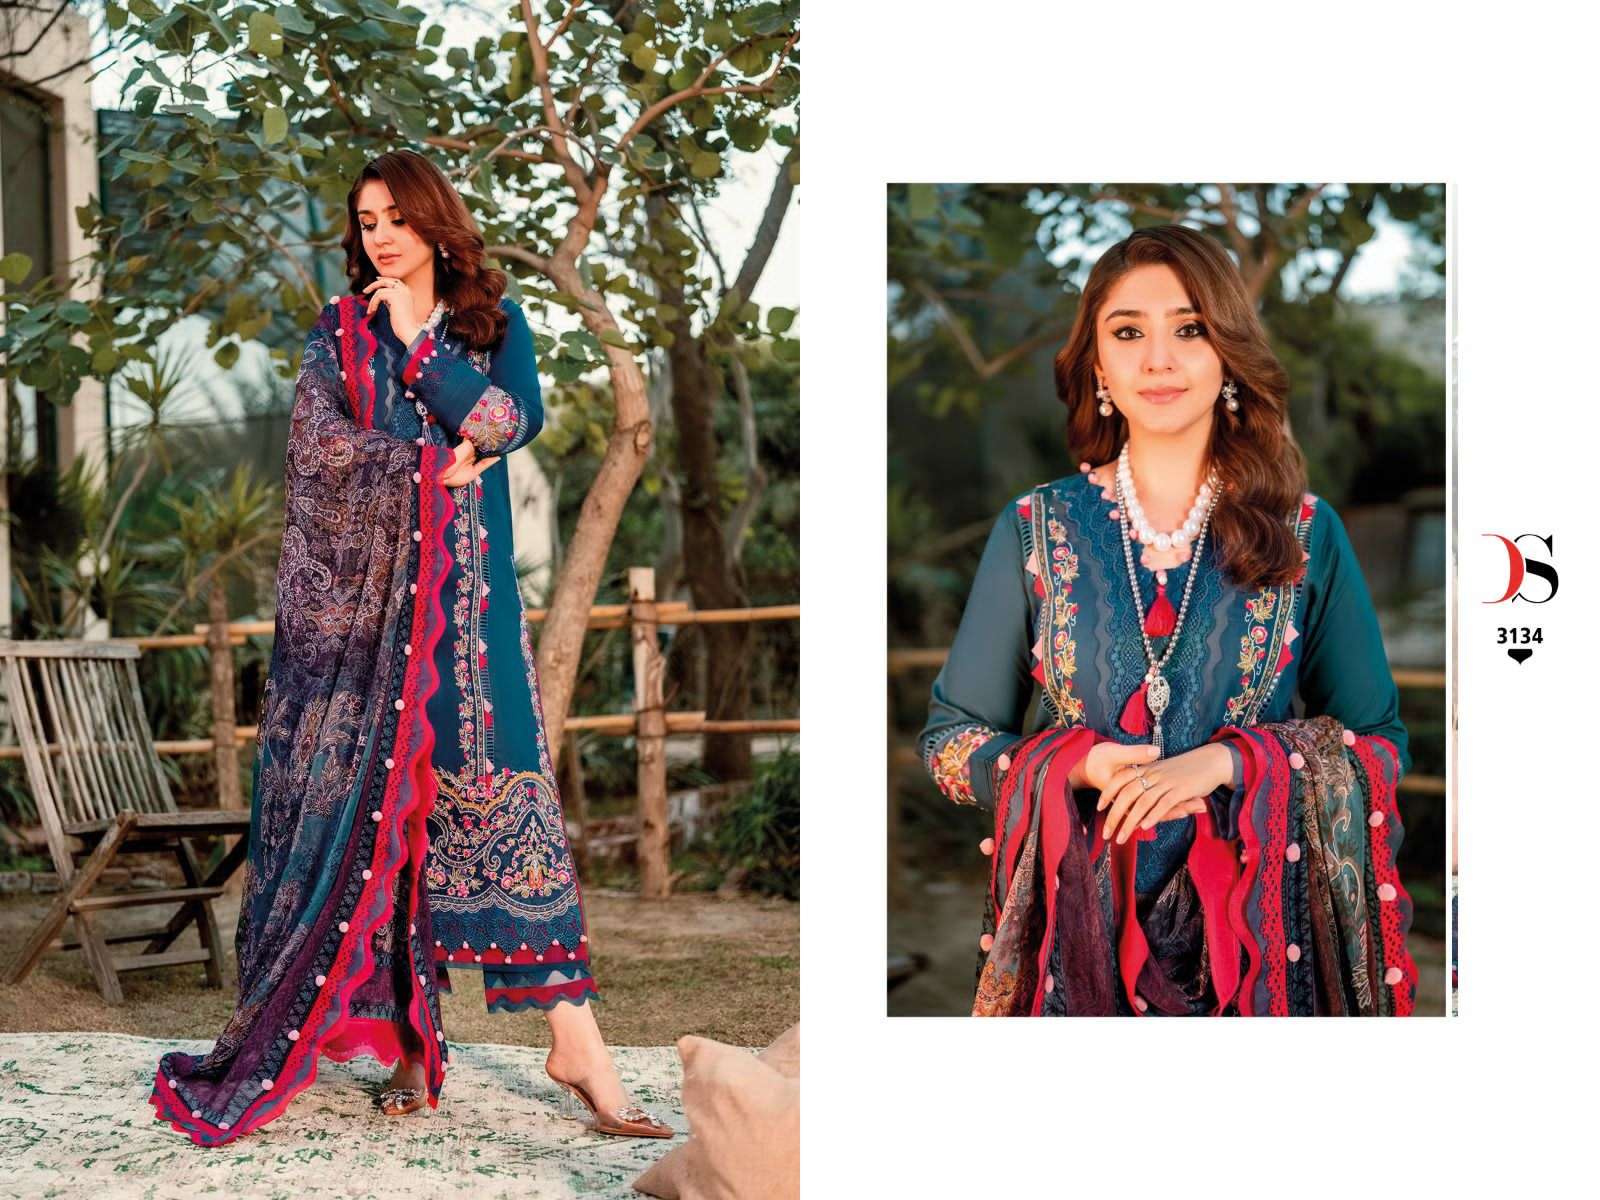 firdous ombre embroidered vol-2 nx by deepsy suits pakistani salwar kameez wholesale price 